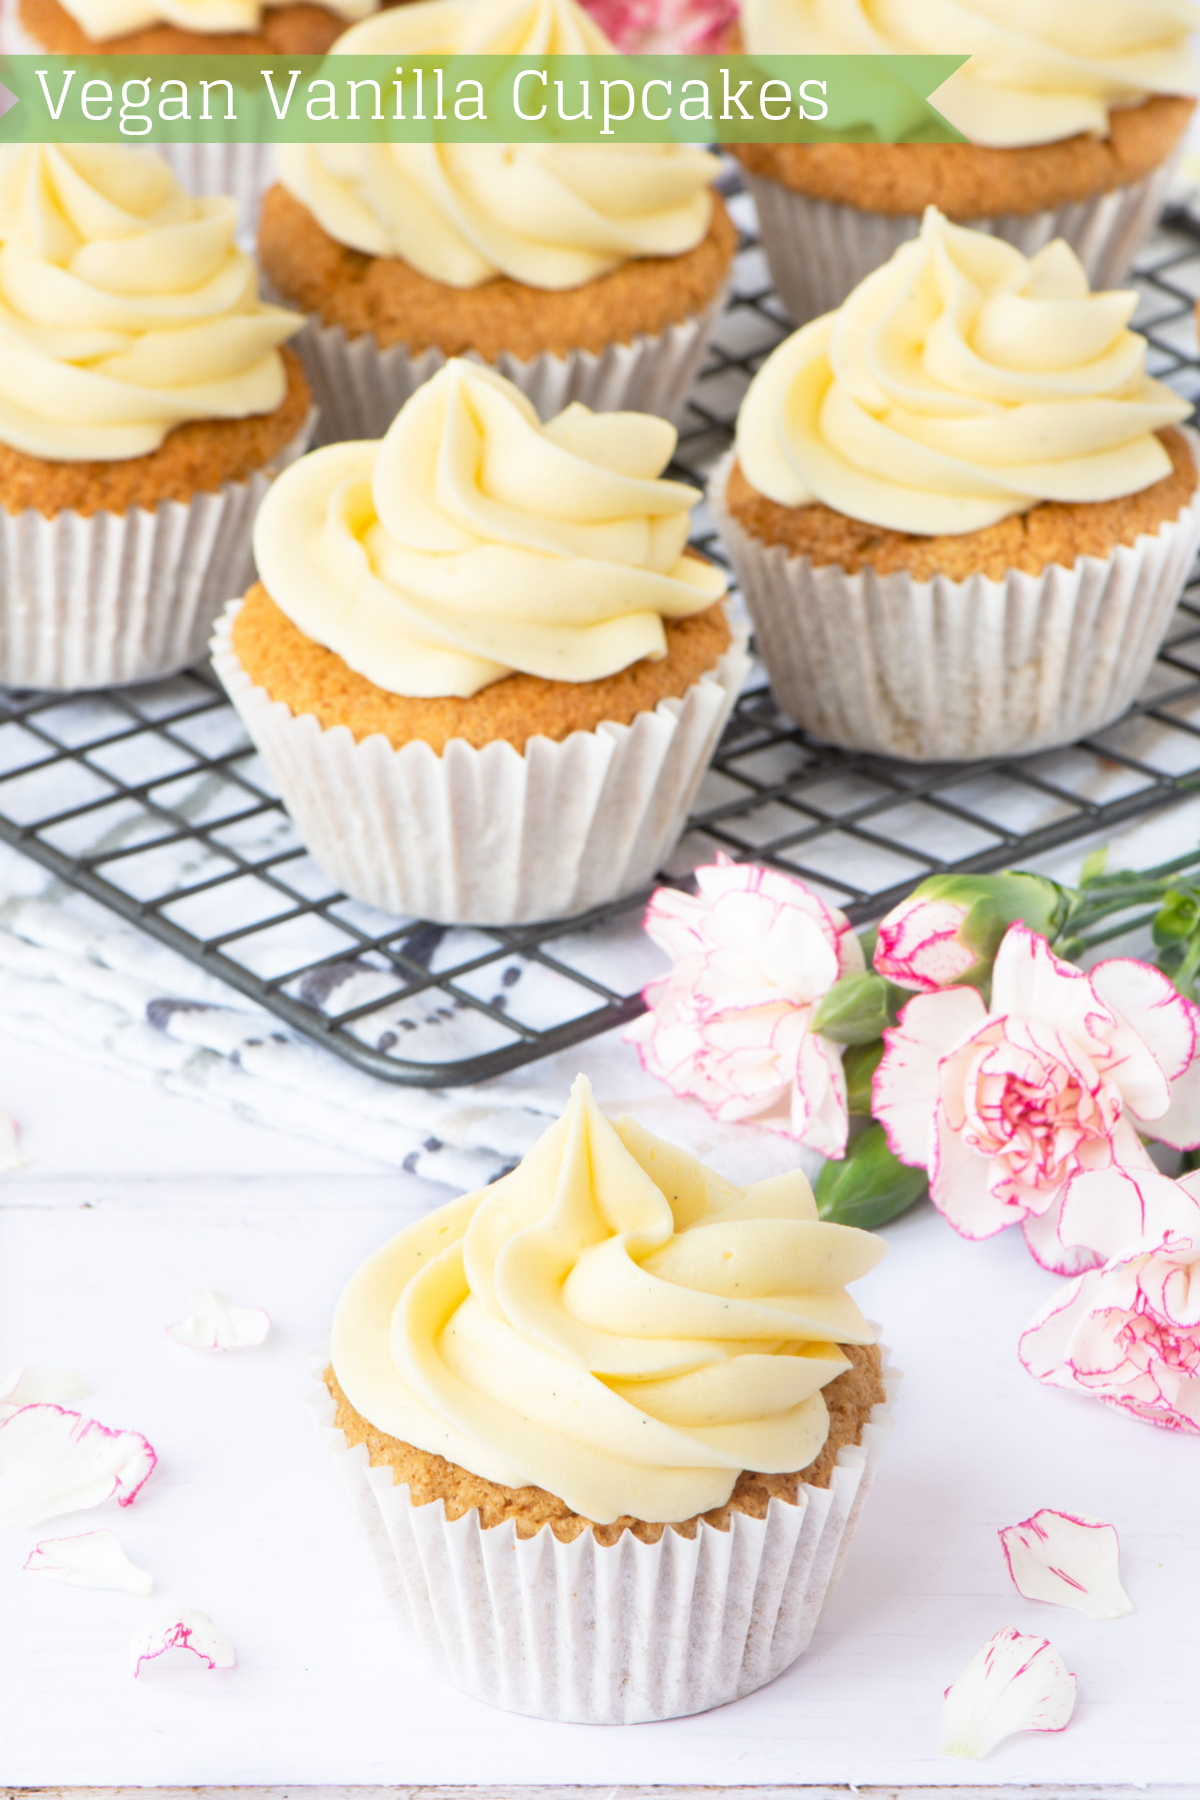 These vegan vanilla cupcakes are easy to make and taste delicious. No one would guess that they’re egg and dairy-free.